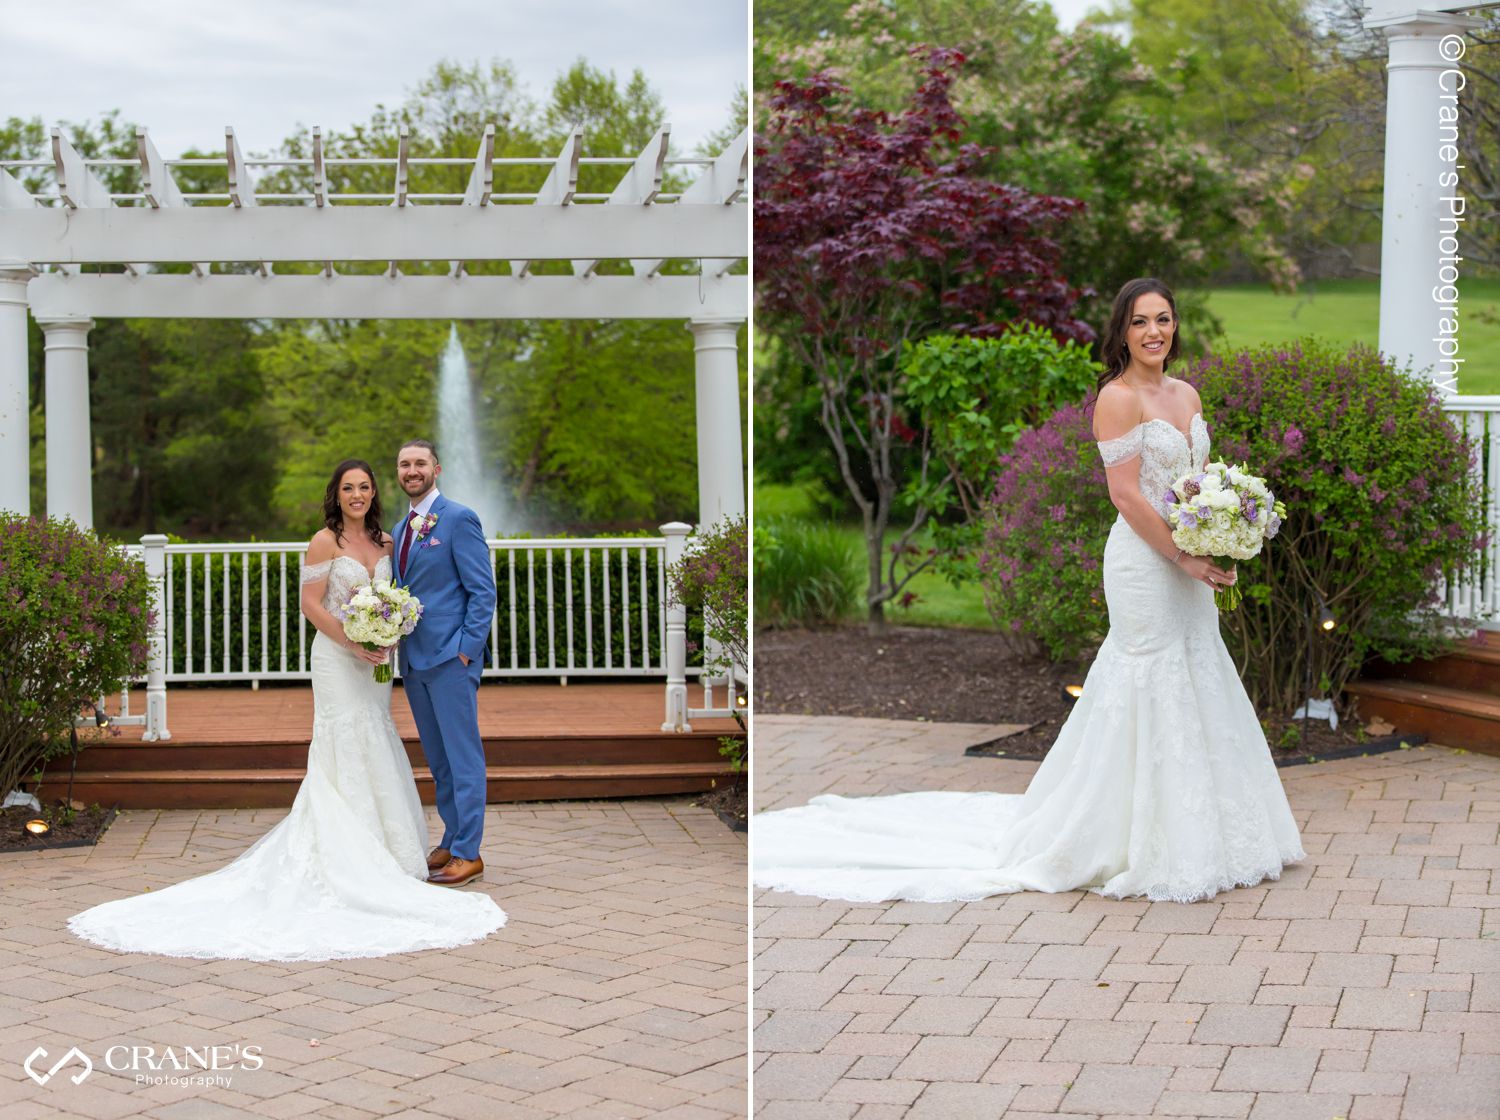 Bride and groom portrait at the gazebo at Concorde Banquets